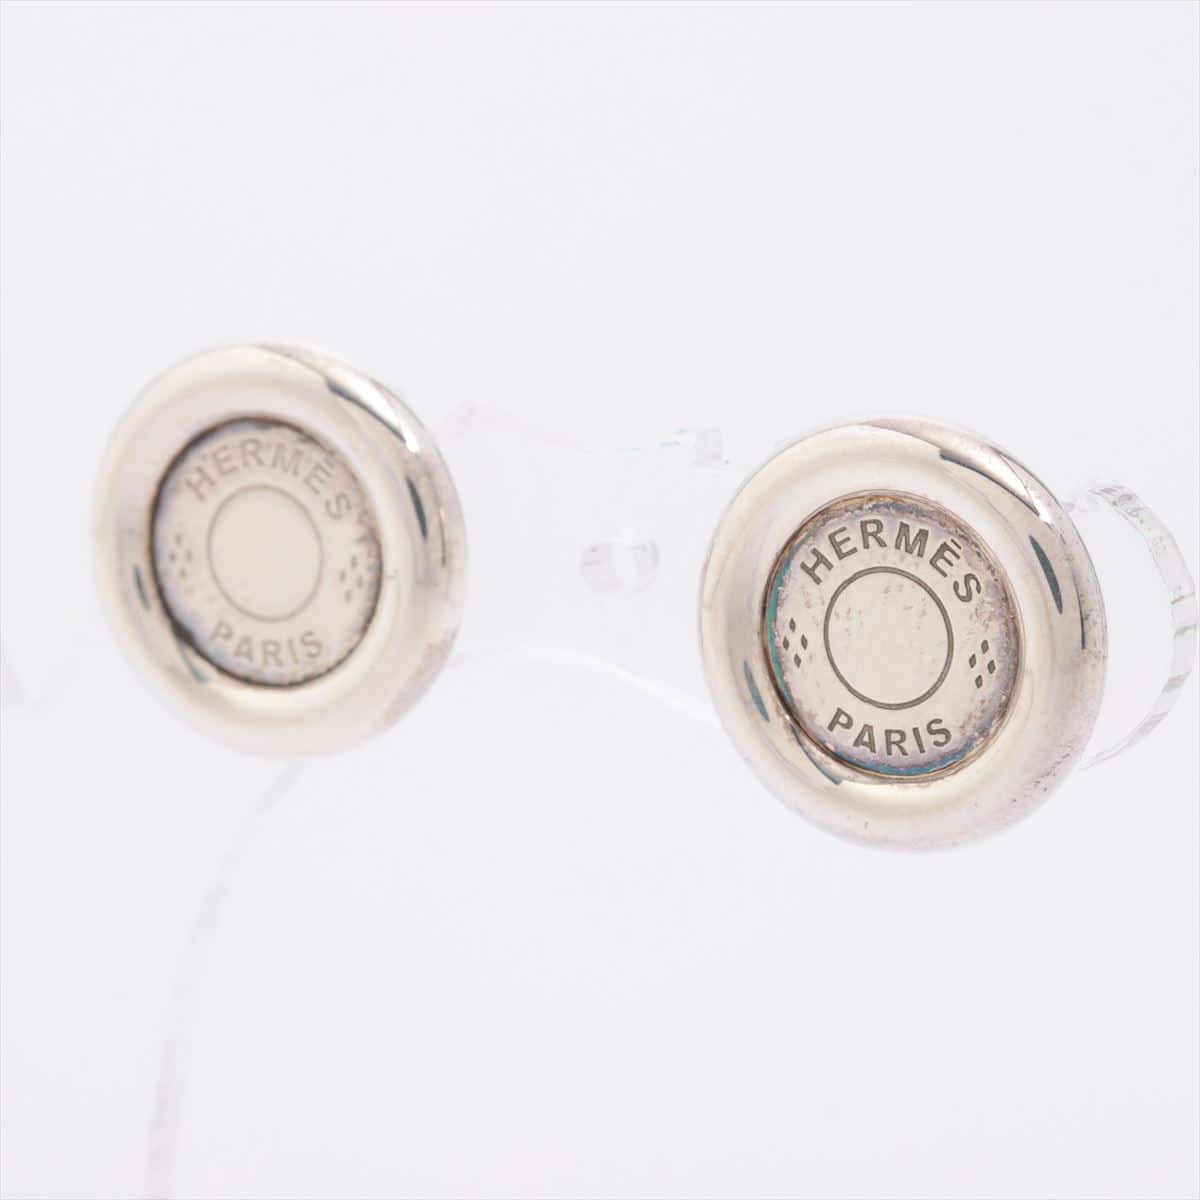 Hermès Serie Piercing jewelry (for both ears) 925 5.3g Silver